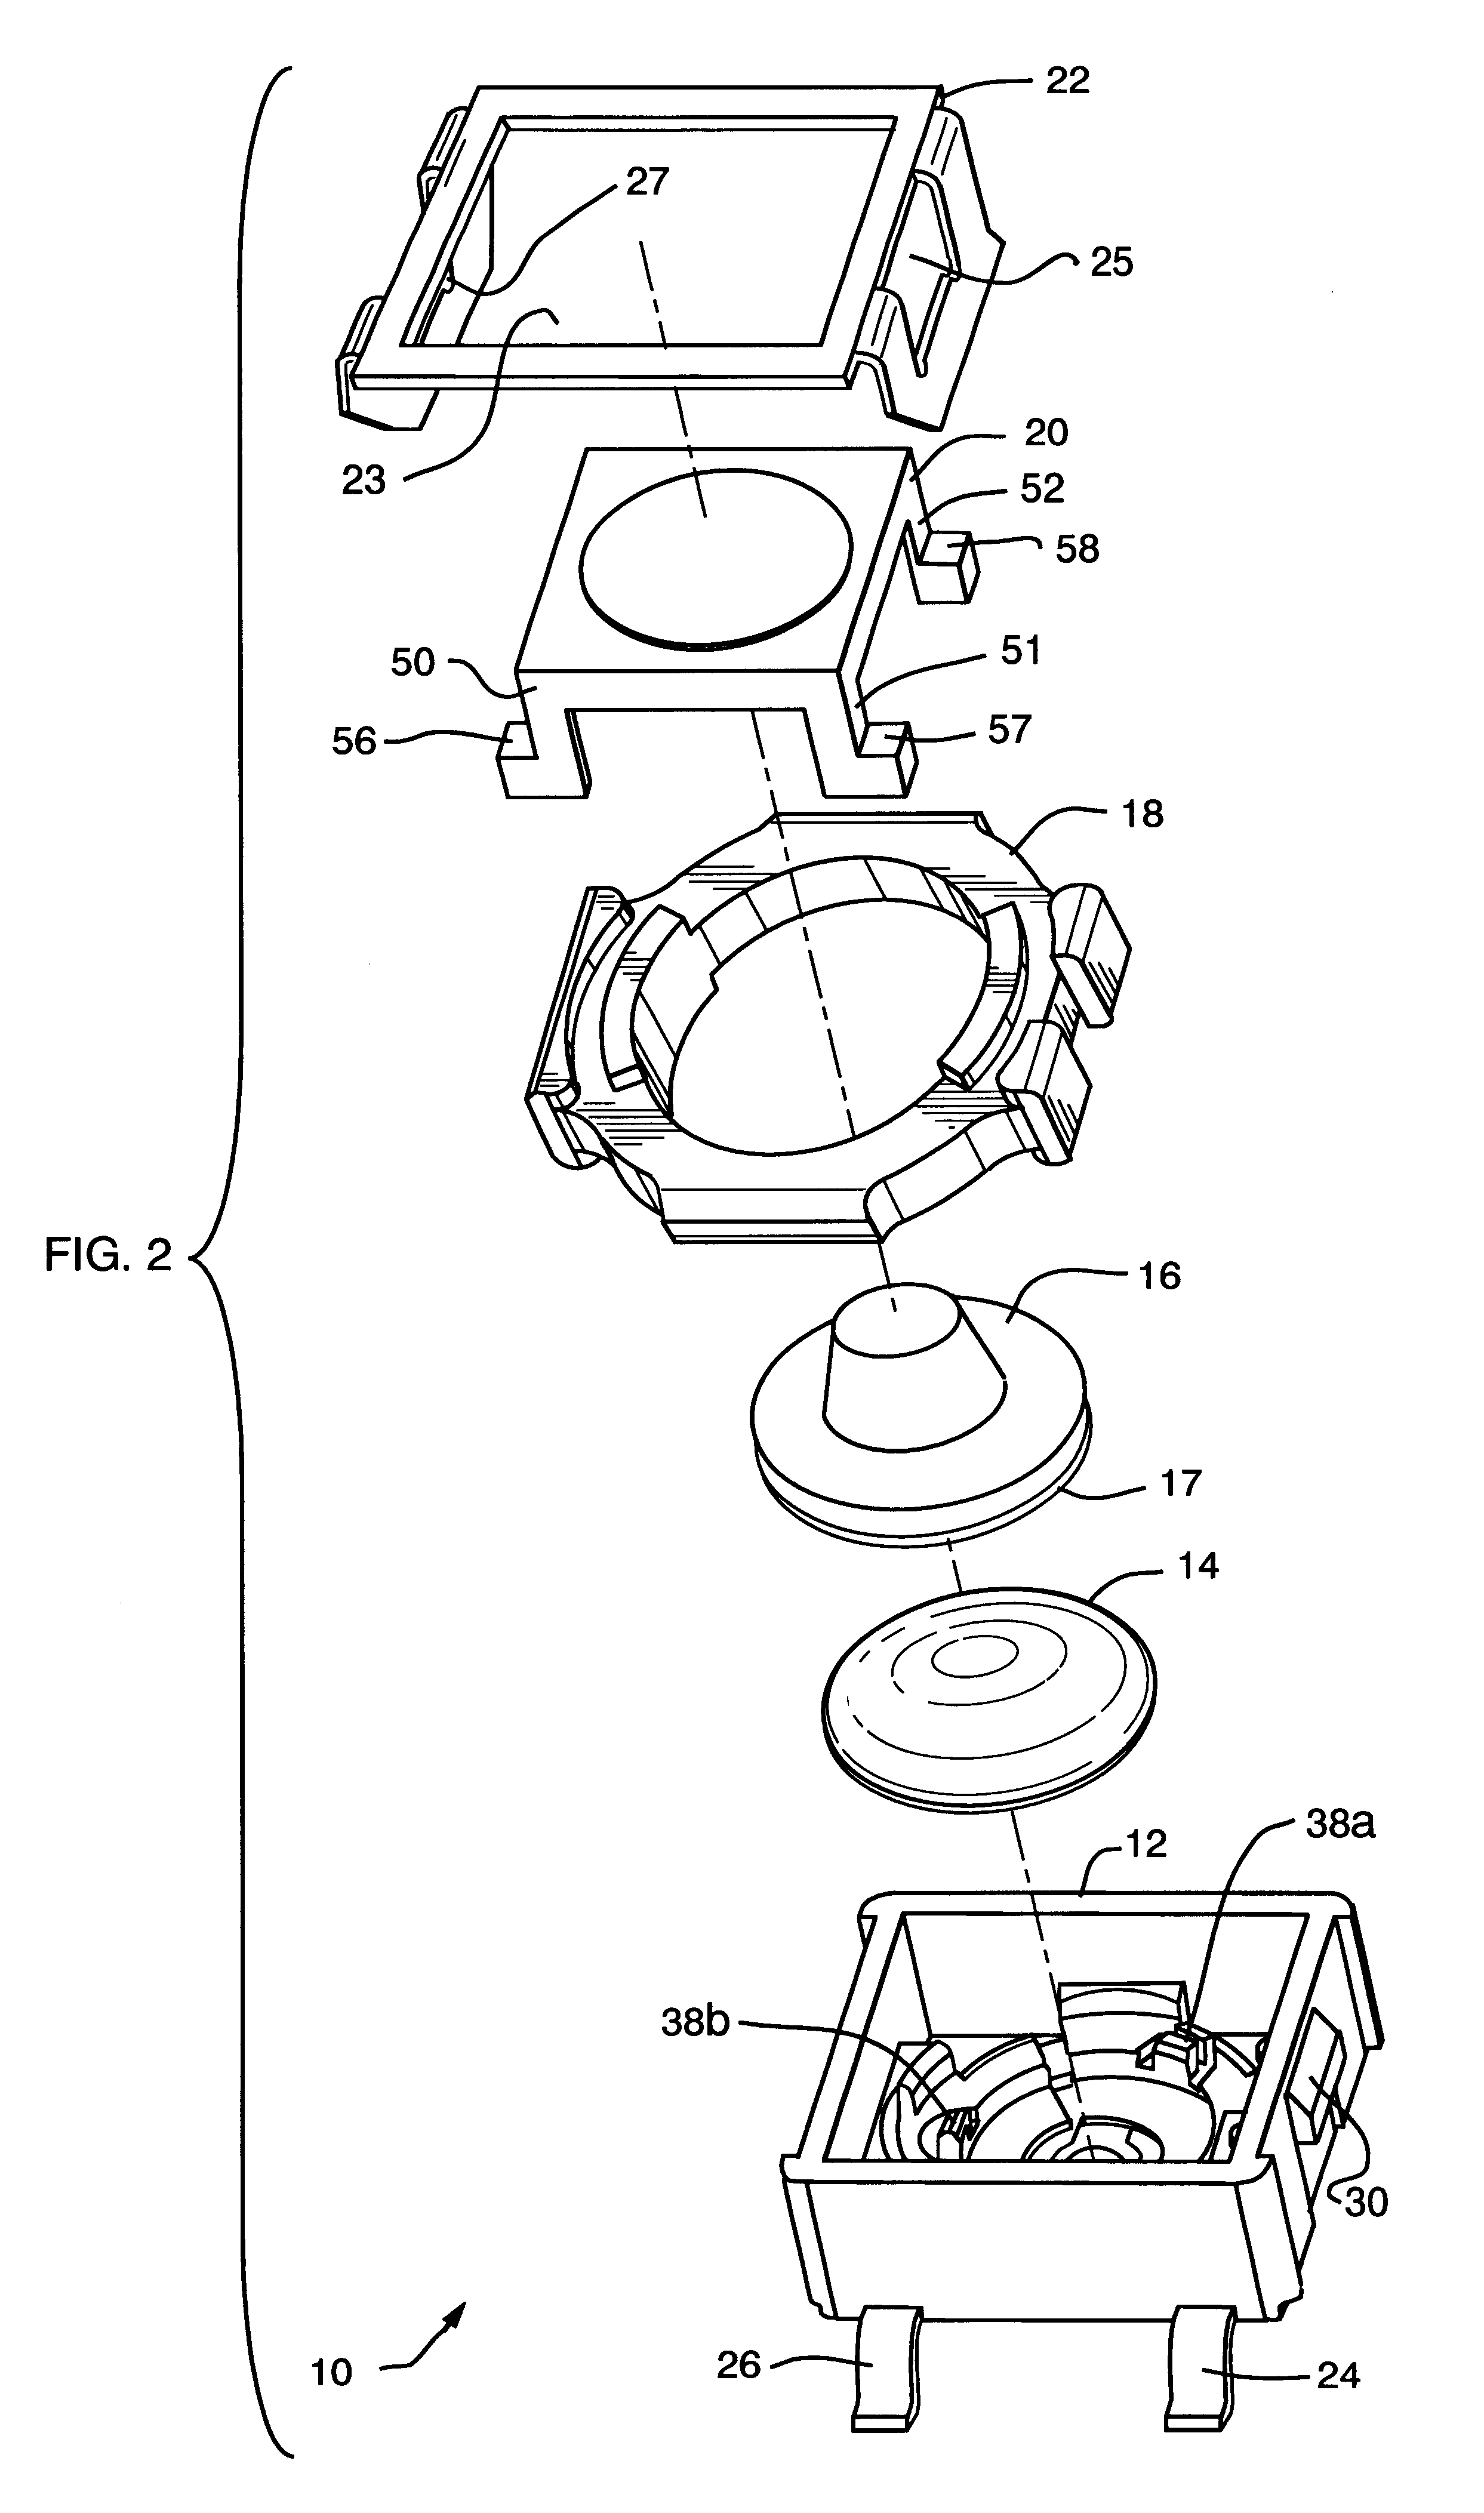 Normally open extended travel dual tact switch assembly with sequential actuation of individual switches